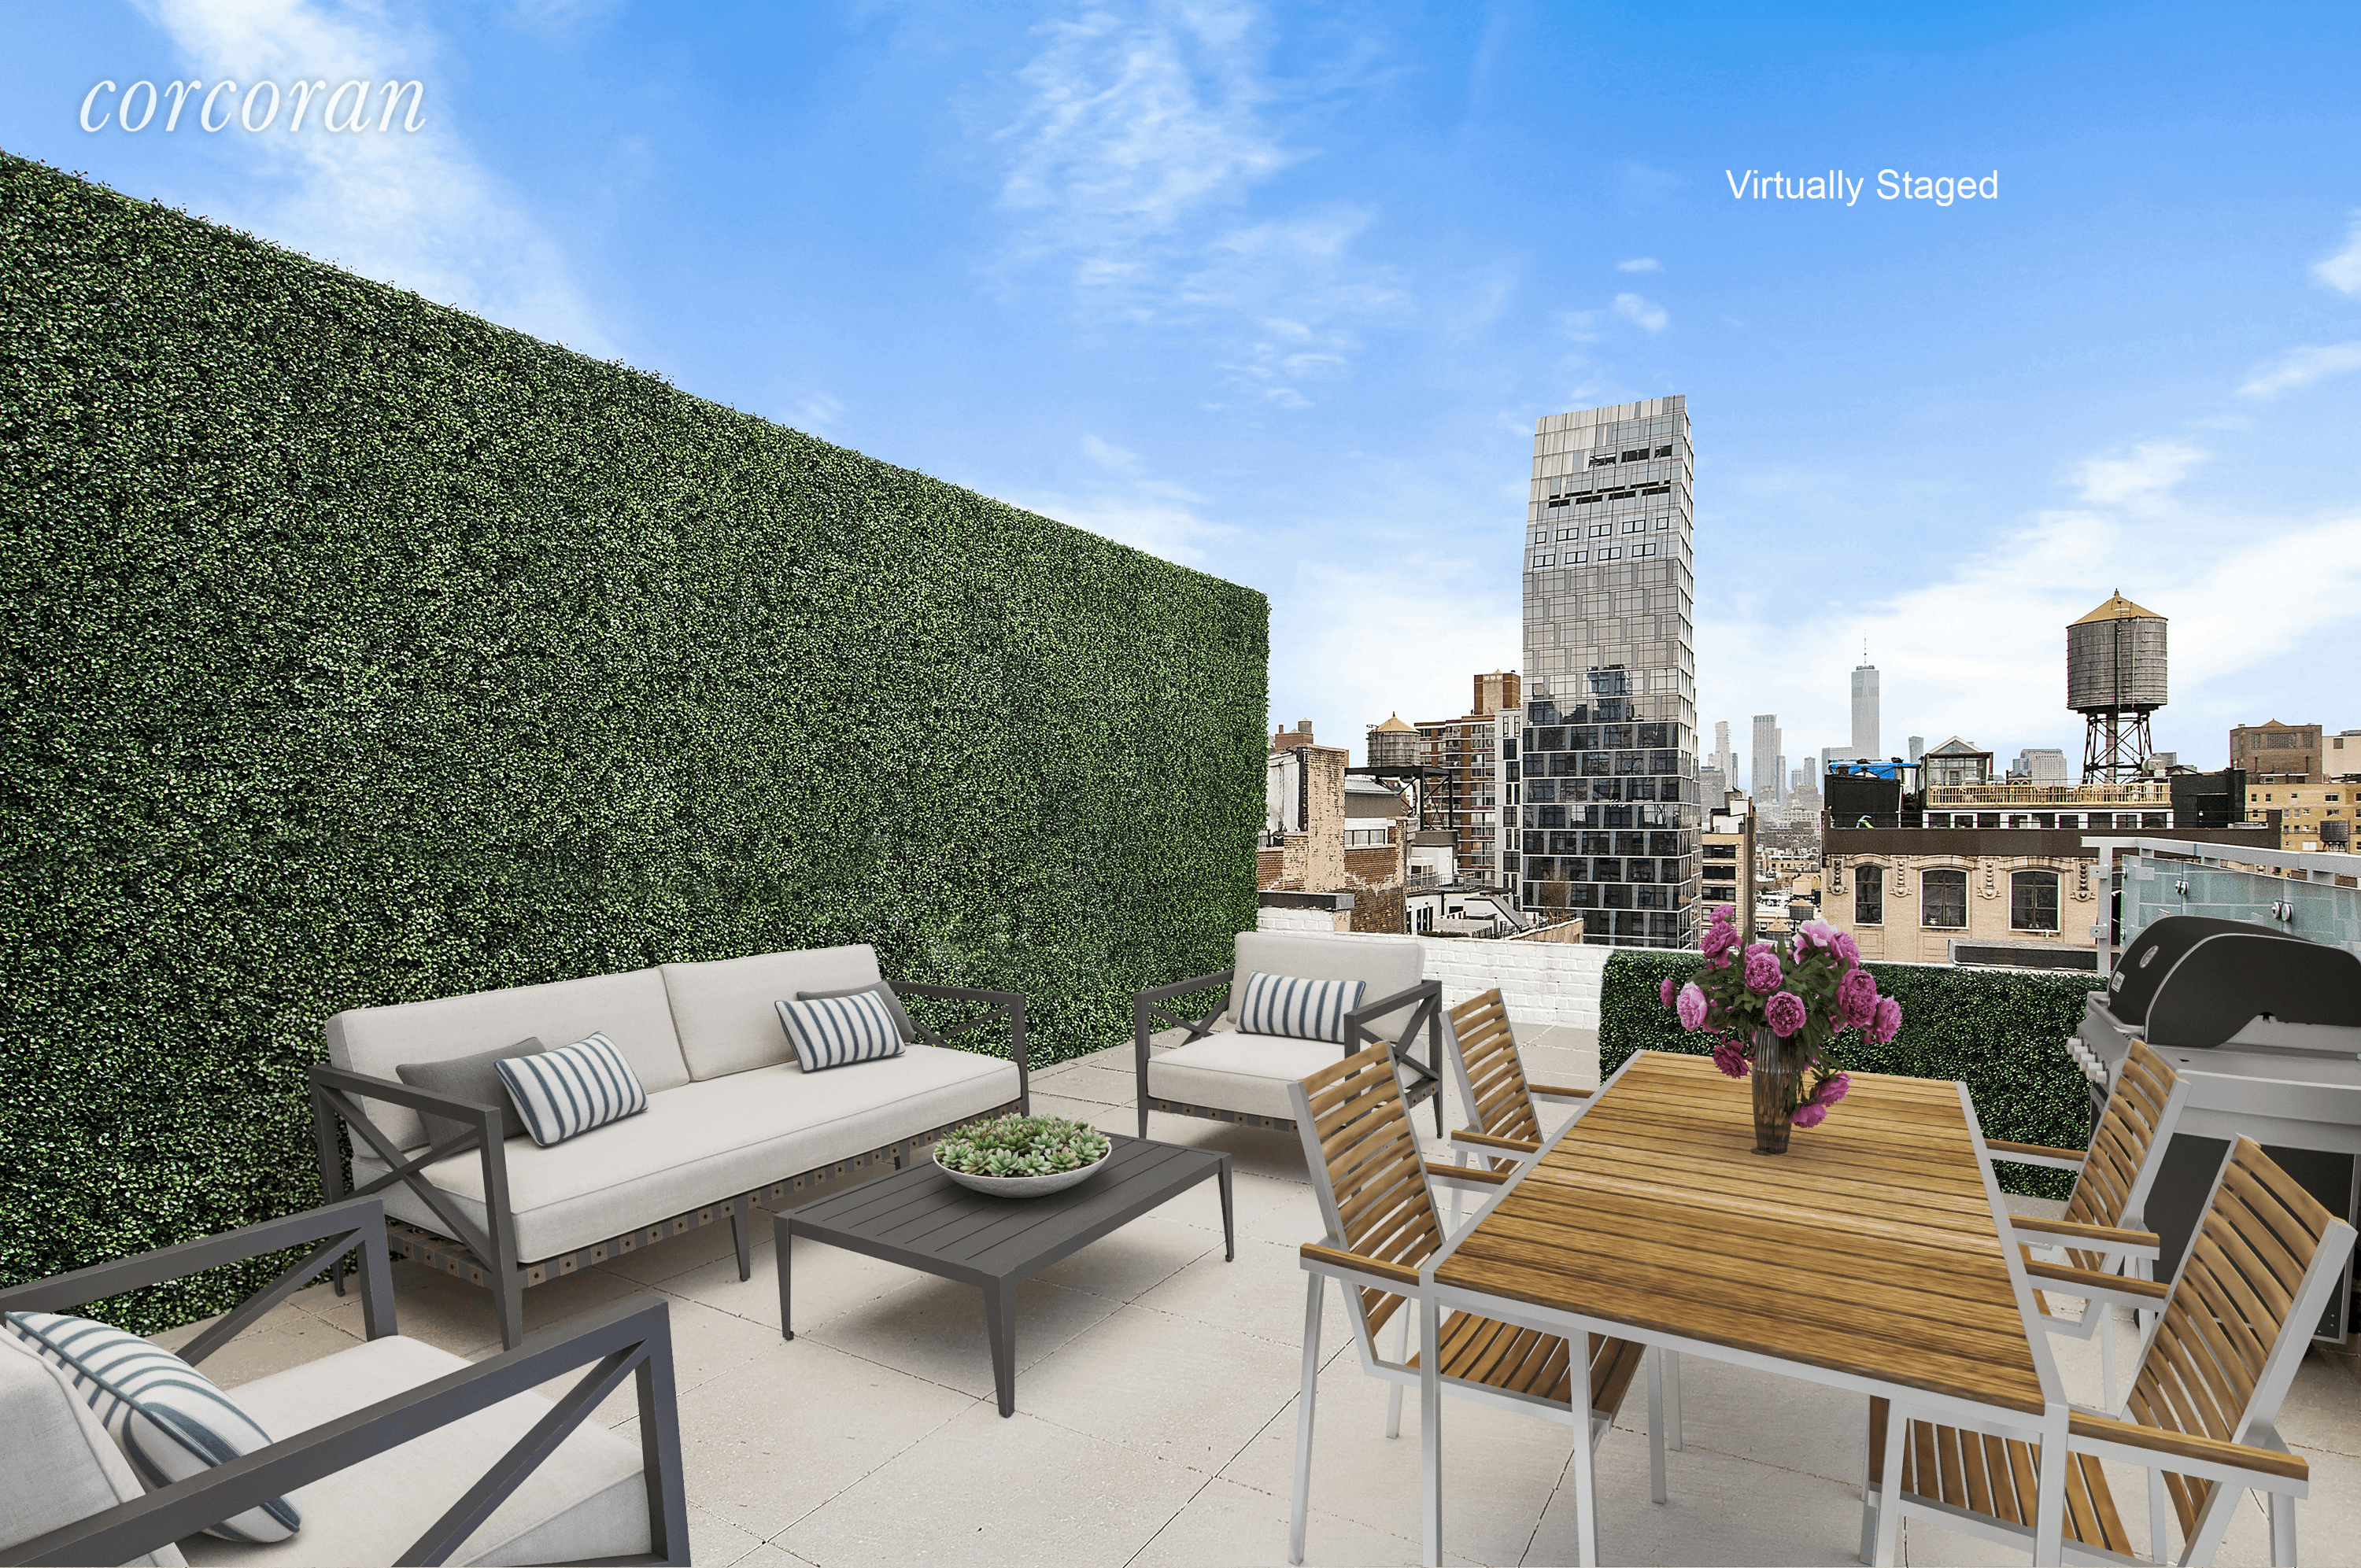 TWO perfect and exclusive SOUTH FACING SUNLIT OUTDOOR PENTHOUSE TERRACES with open skies above.